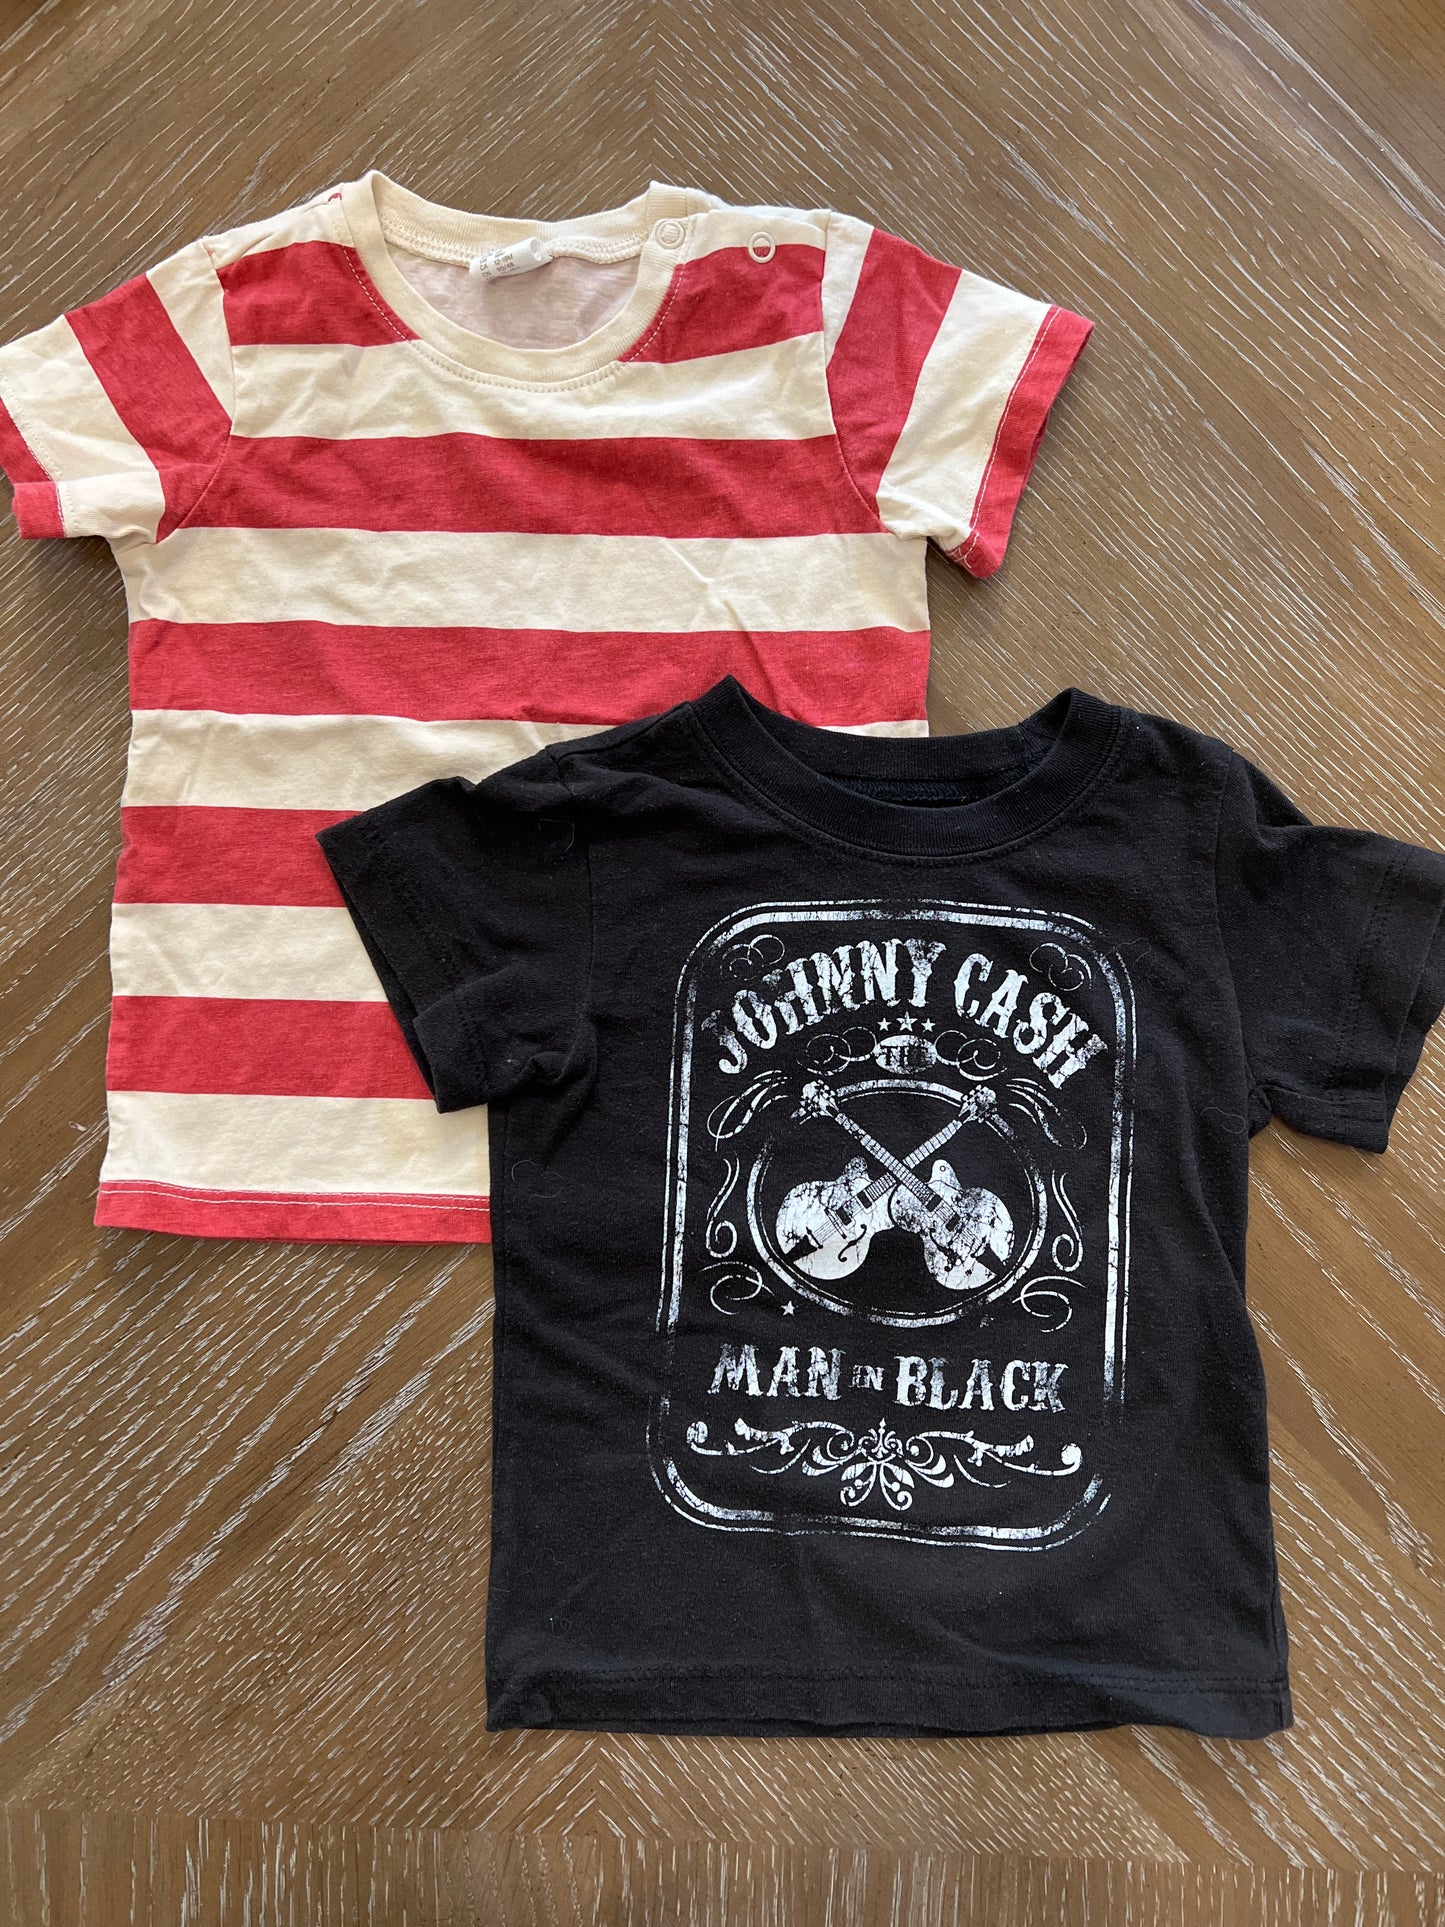 H&M red stripe tee & Johnny cash tee 18 month